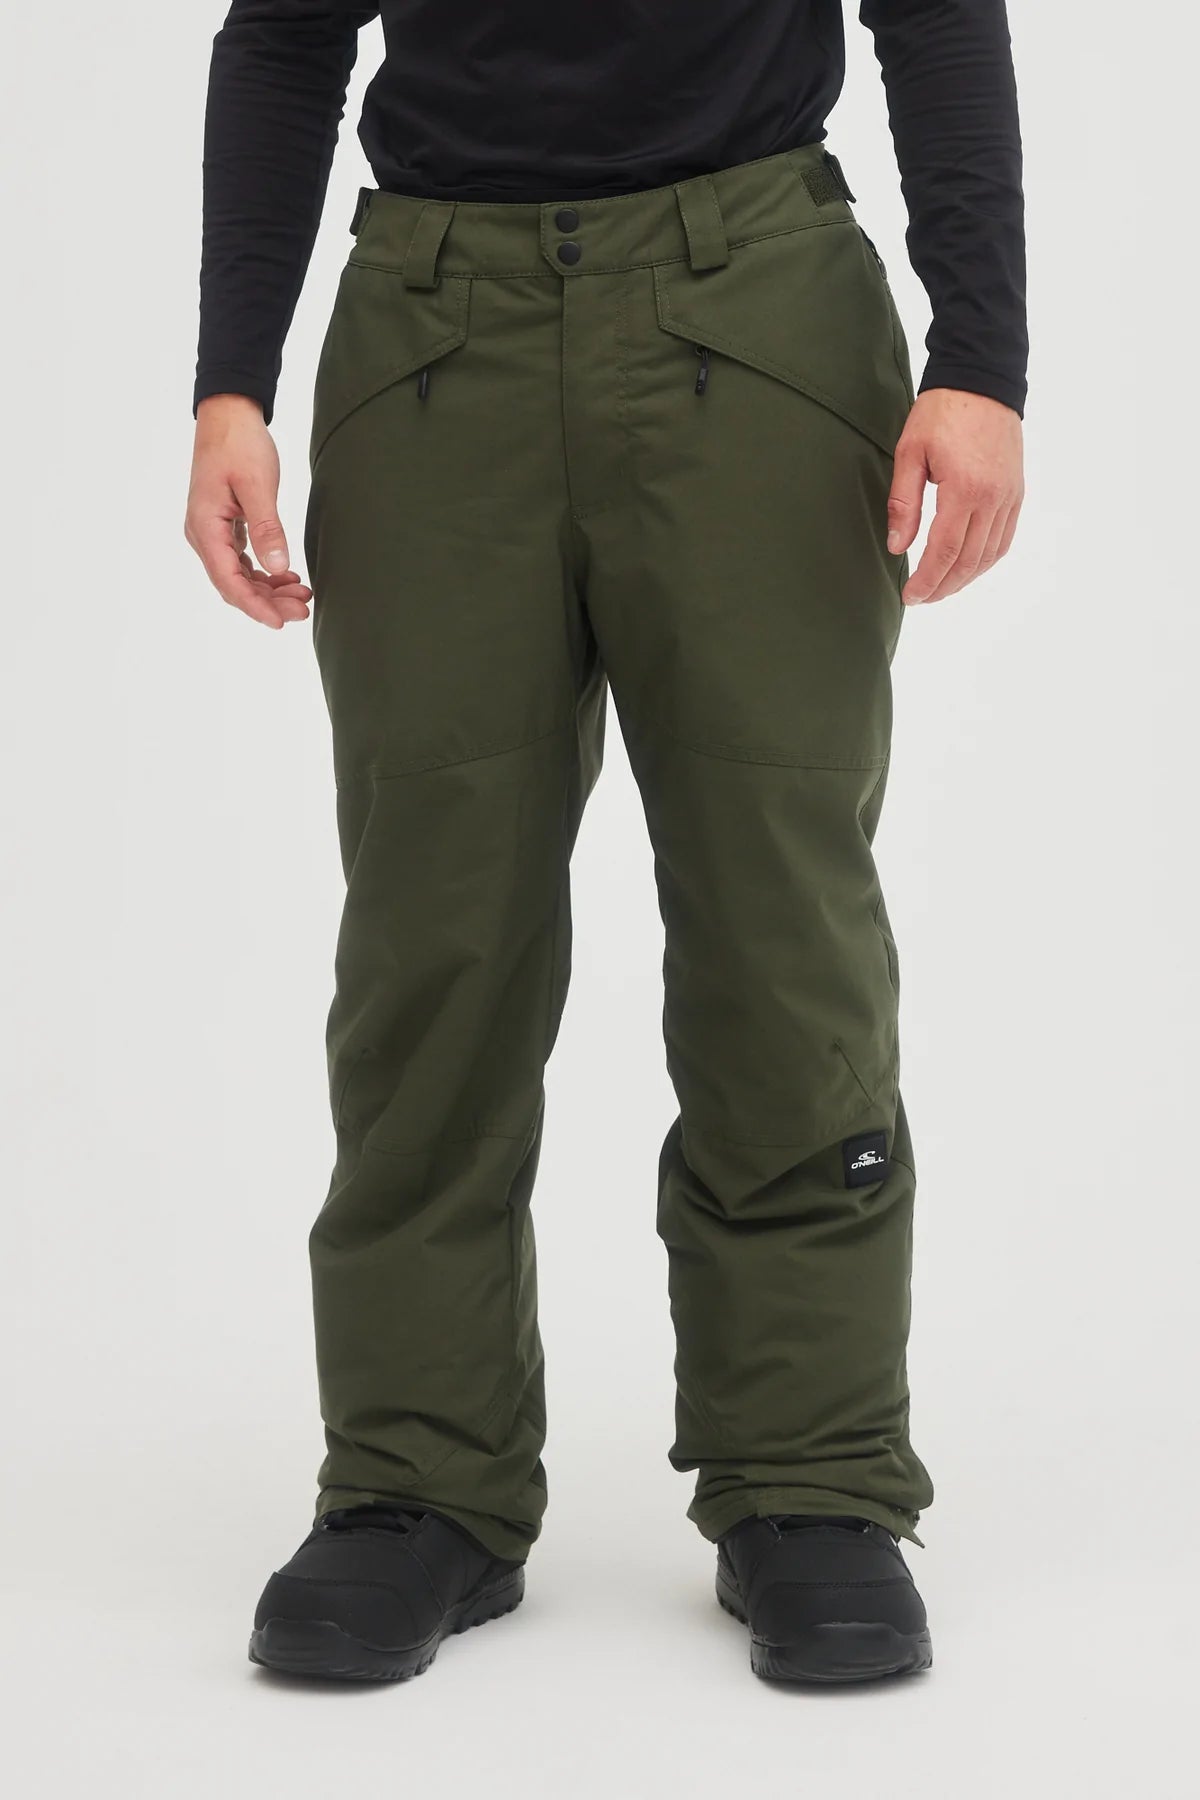 O'Neill Hammer Insulated Men'S Ski / Snowboard Pants-O'Neill-Sports Replay - Sports Excellence